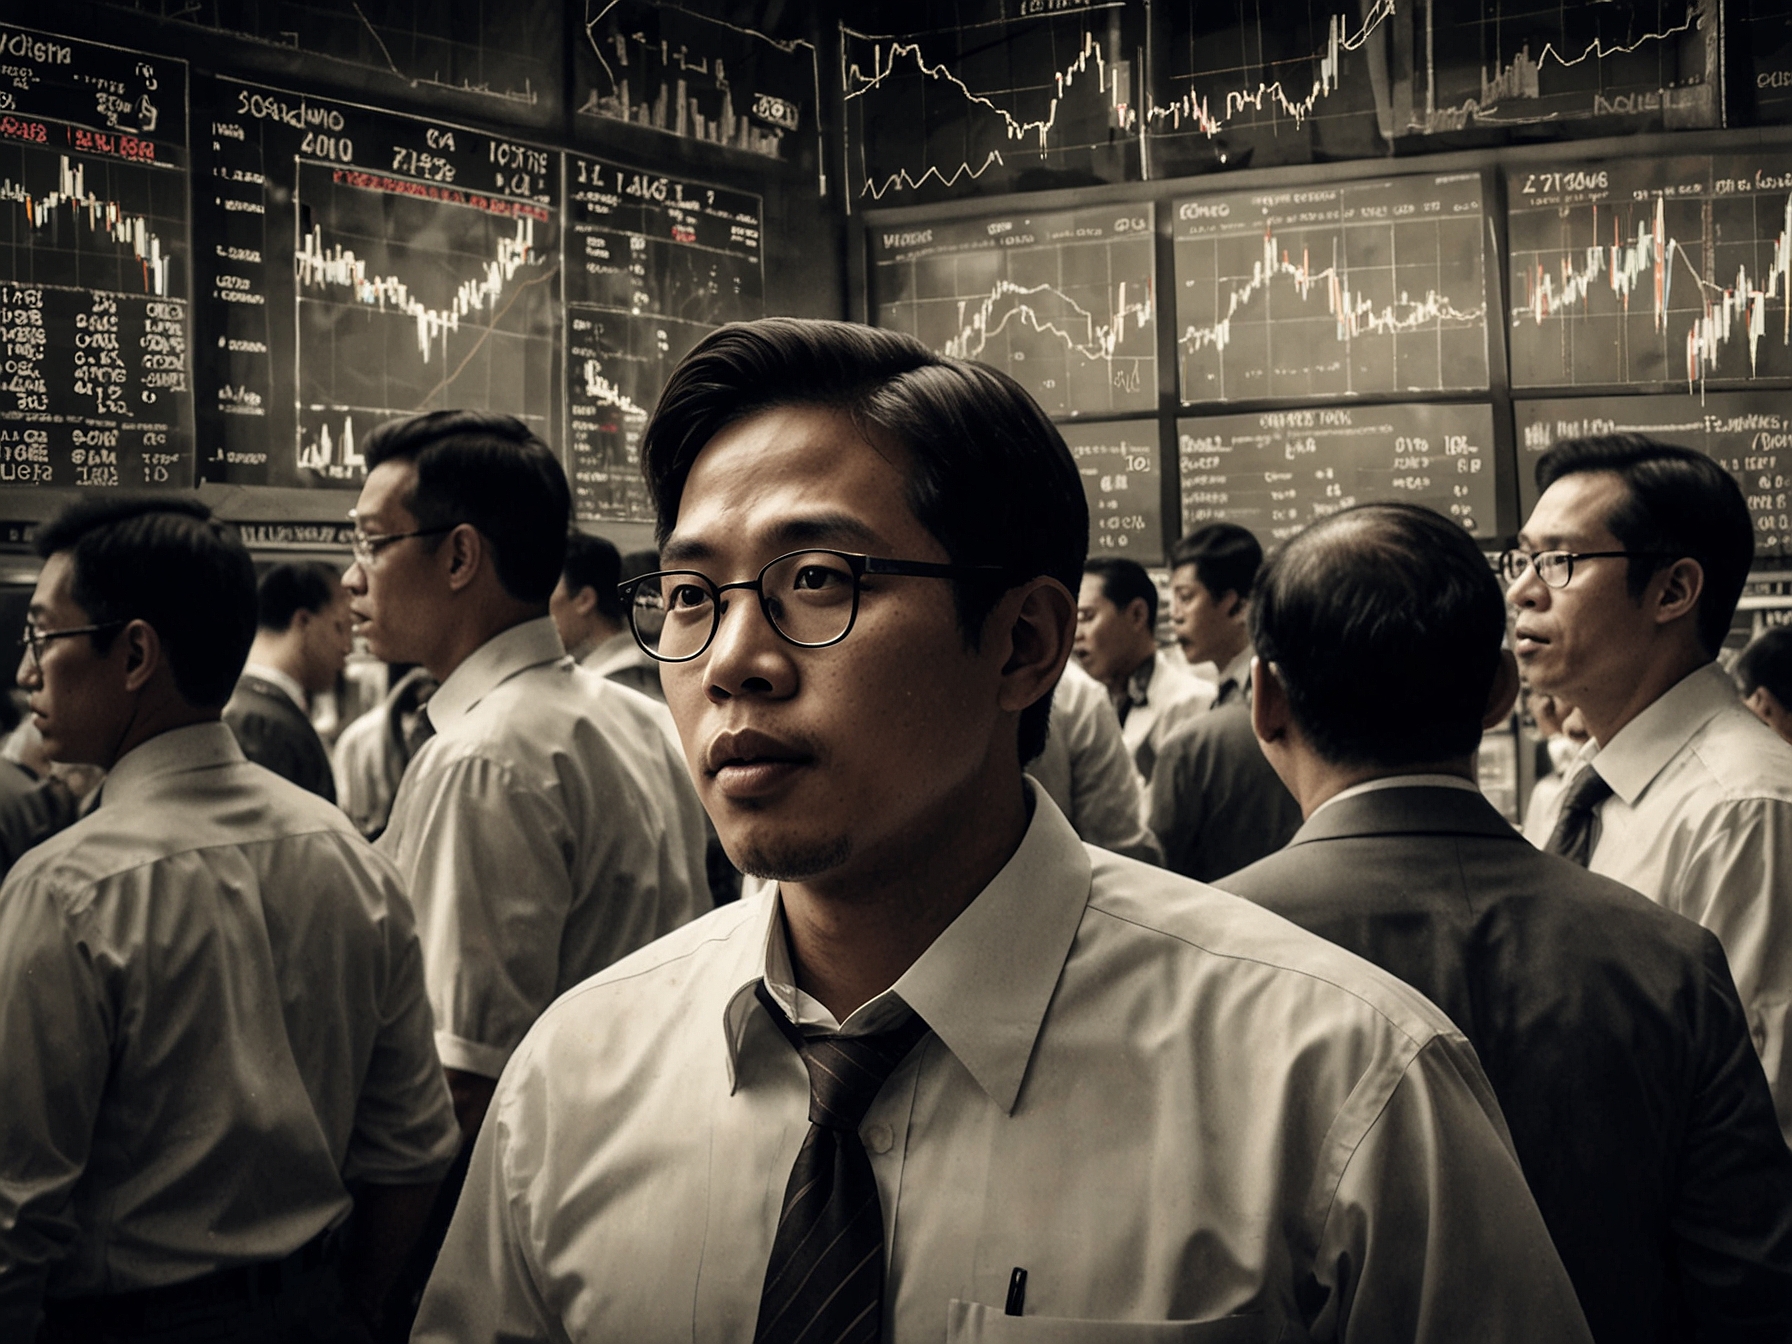 A photo depicting investors at a stock exchange trading floor, referencing the optimistic sentiment and positive performance of the Philippine and US markets. Market indicators and economic data charts are visible.